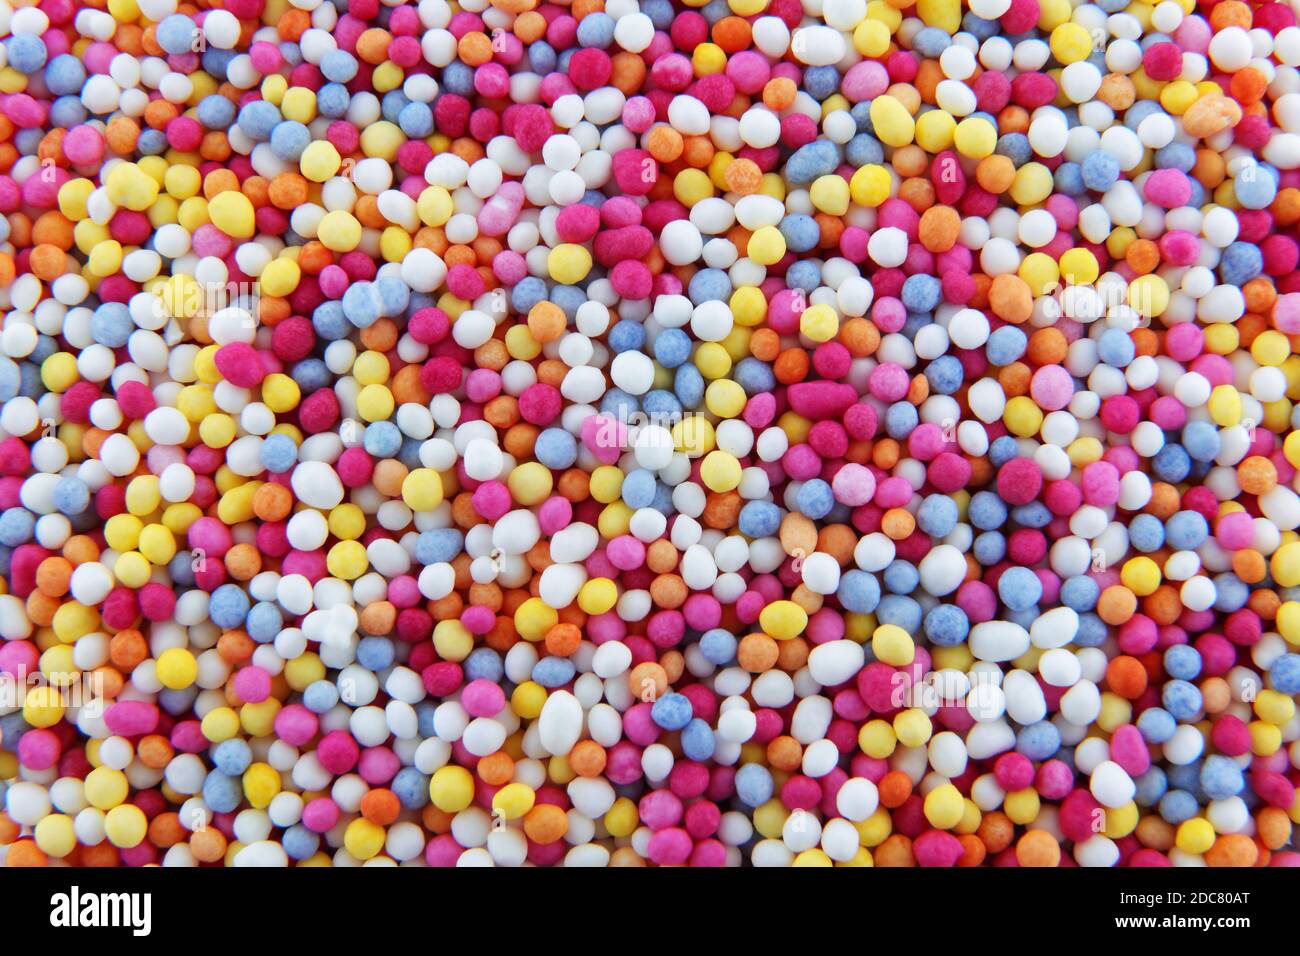 hundreds and thousands sprinkles tiny sugar beads for decorating cakes and desserts background texture Stock Photo